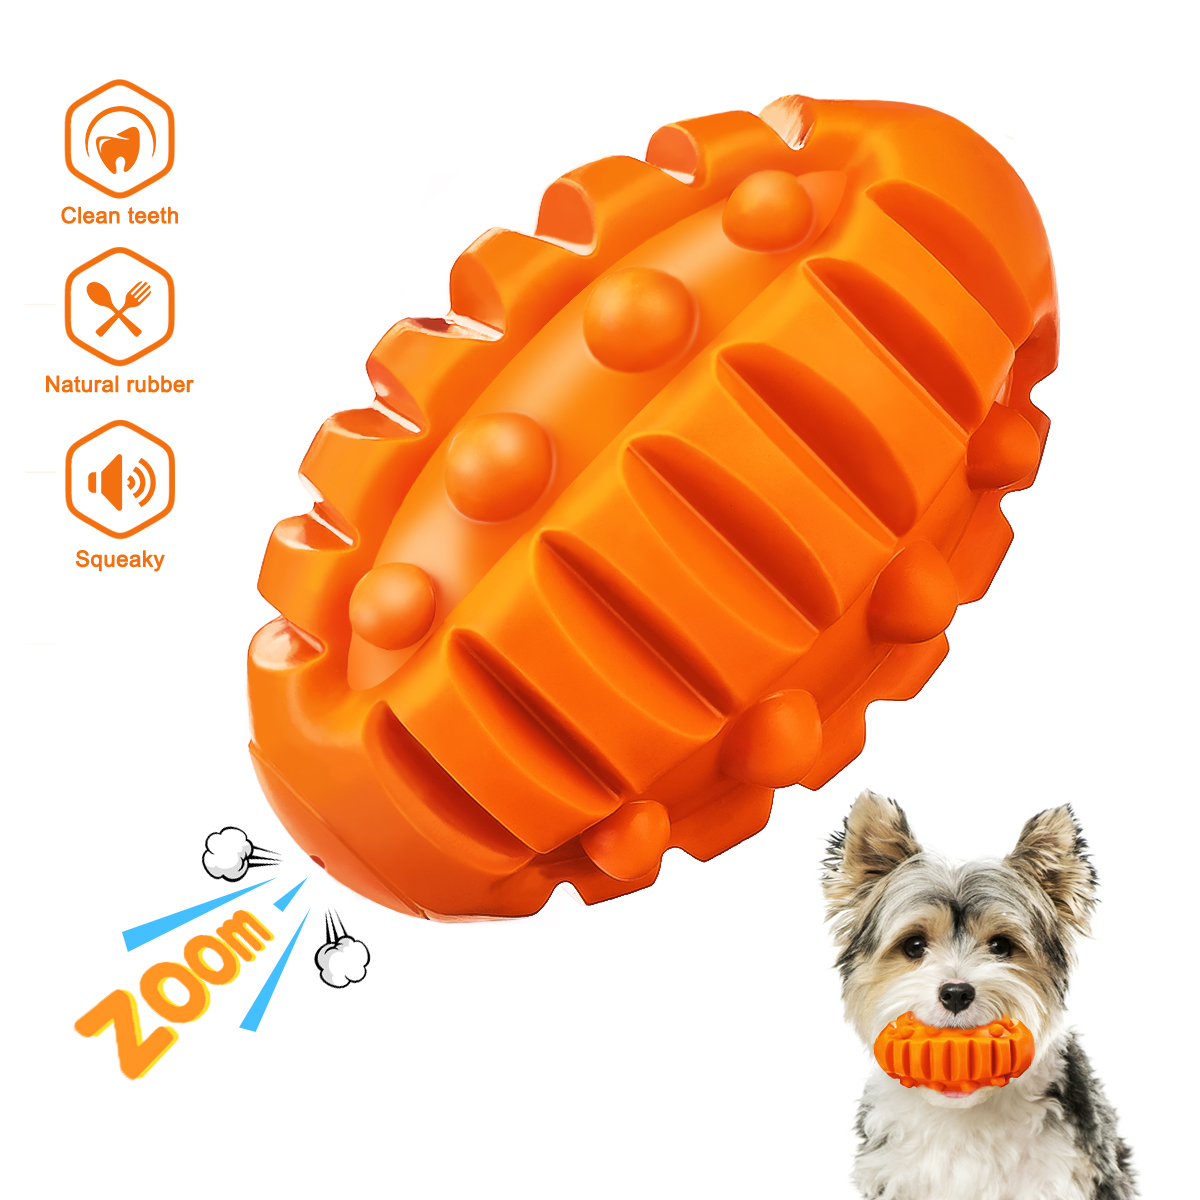 Focuspet-5quotx-3quot-Large-Interactive-Dog-Ball-Toys-Real-Beef-Flavor-Squeaky-Chew-Toy-for-Medium-L-1940481-6